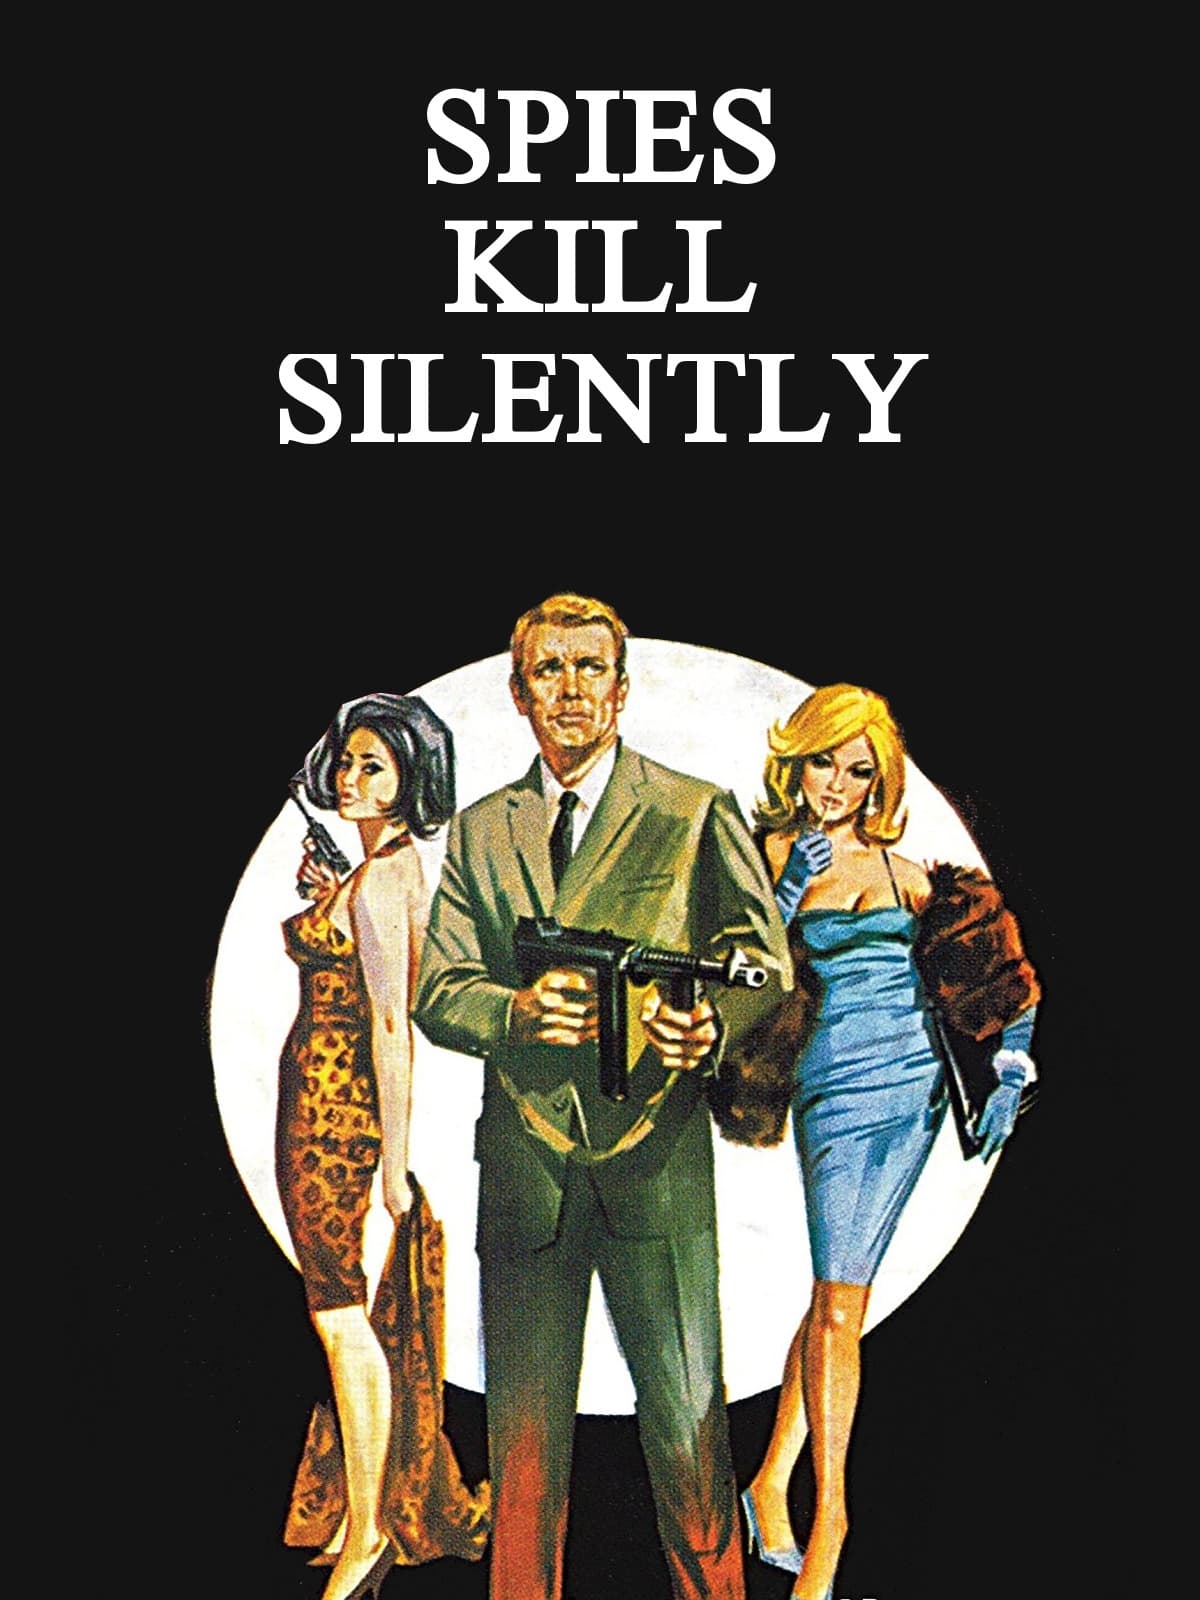 Spies Kill Silently (1966)